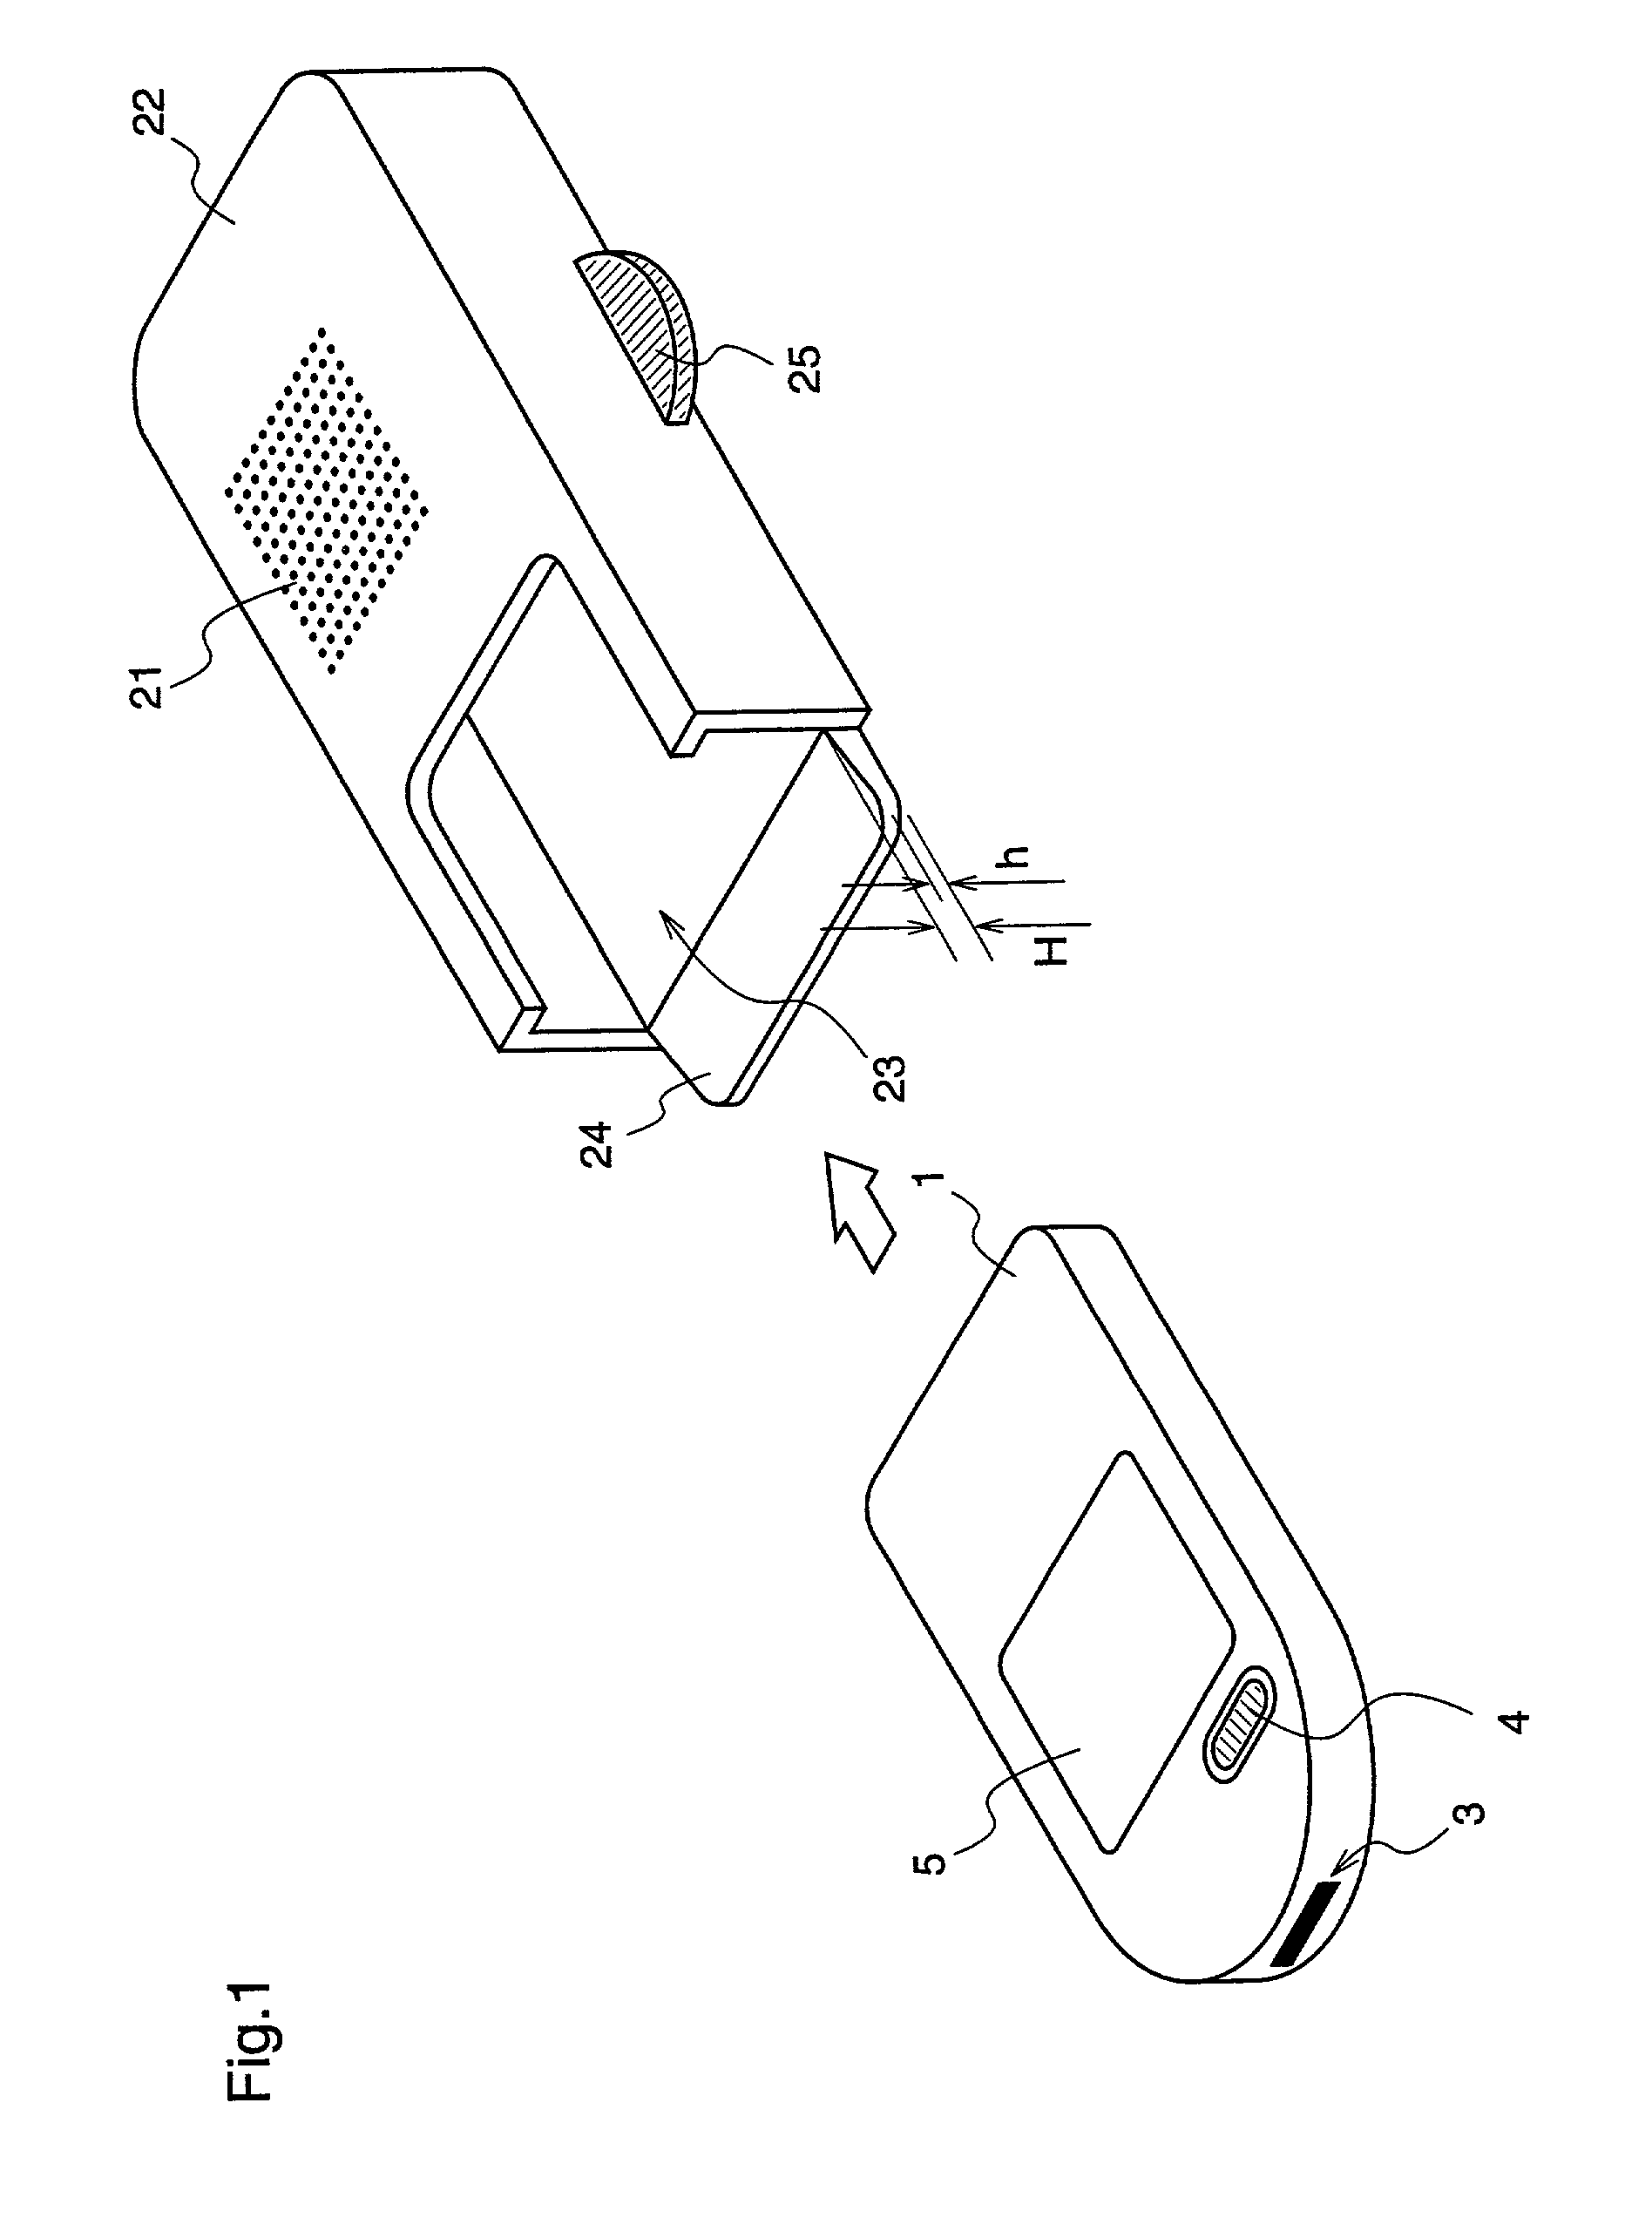 Biometric measuring system with detachable announcement device